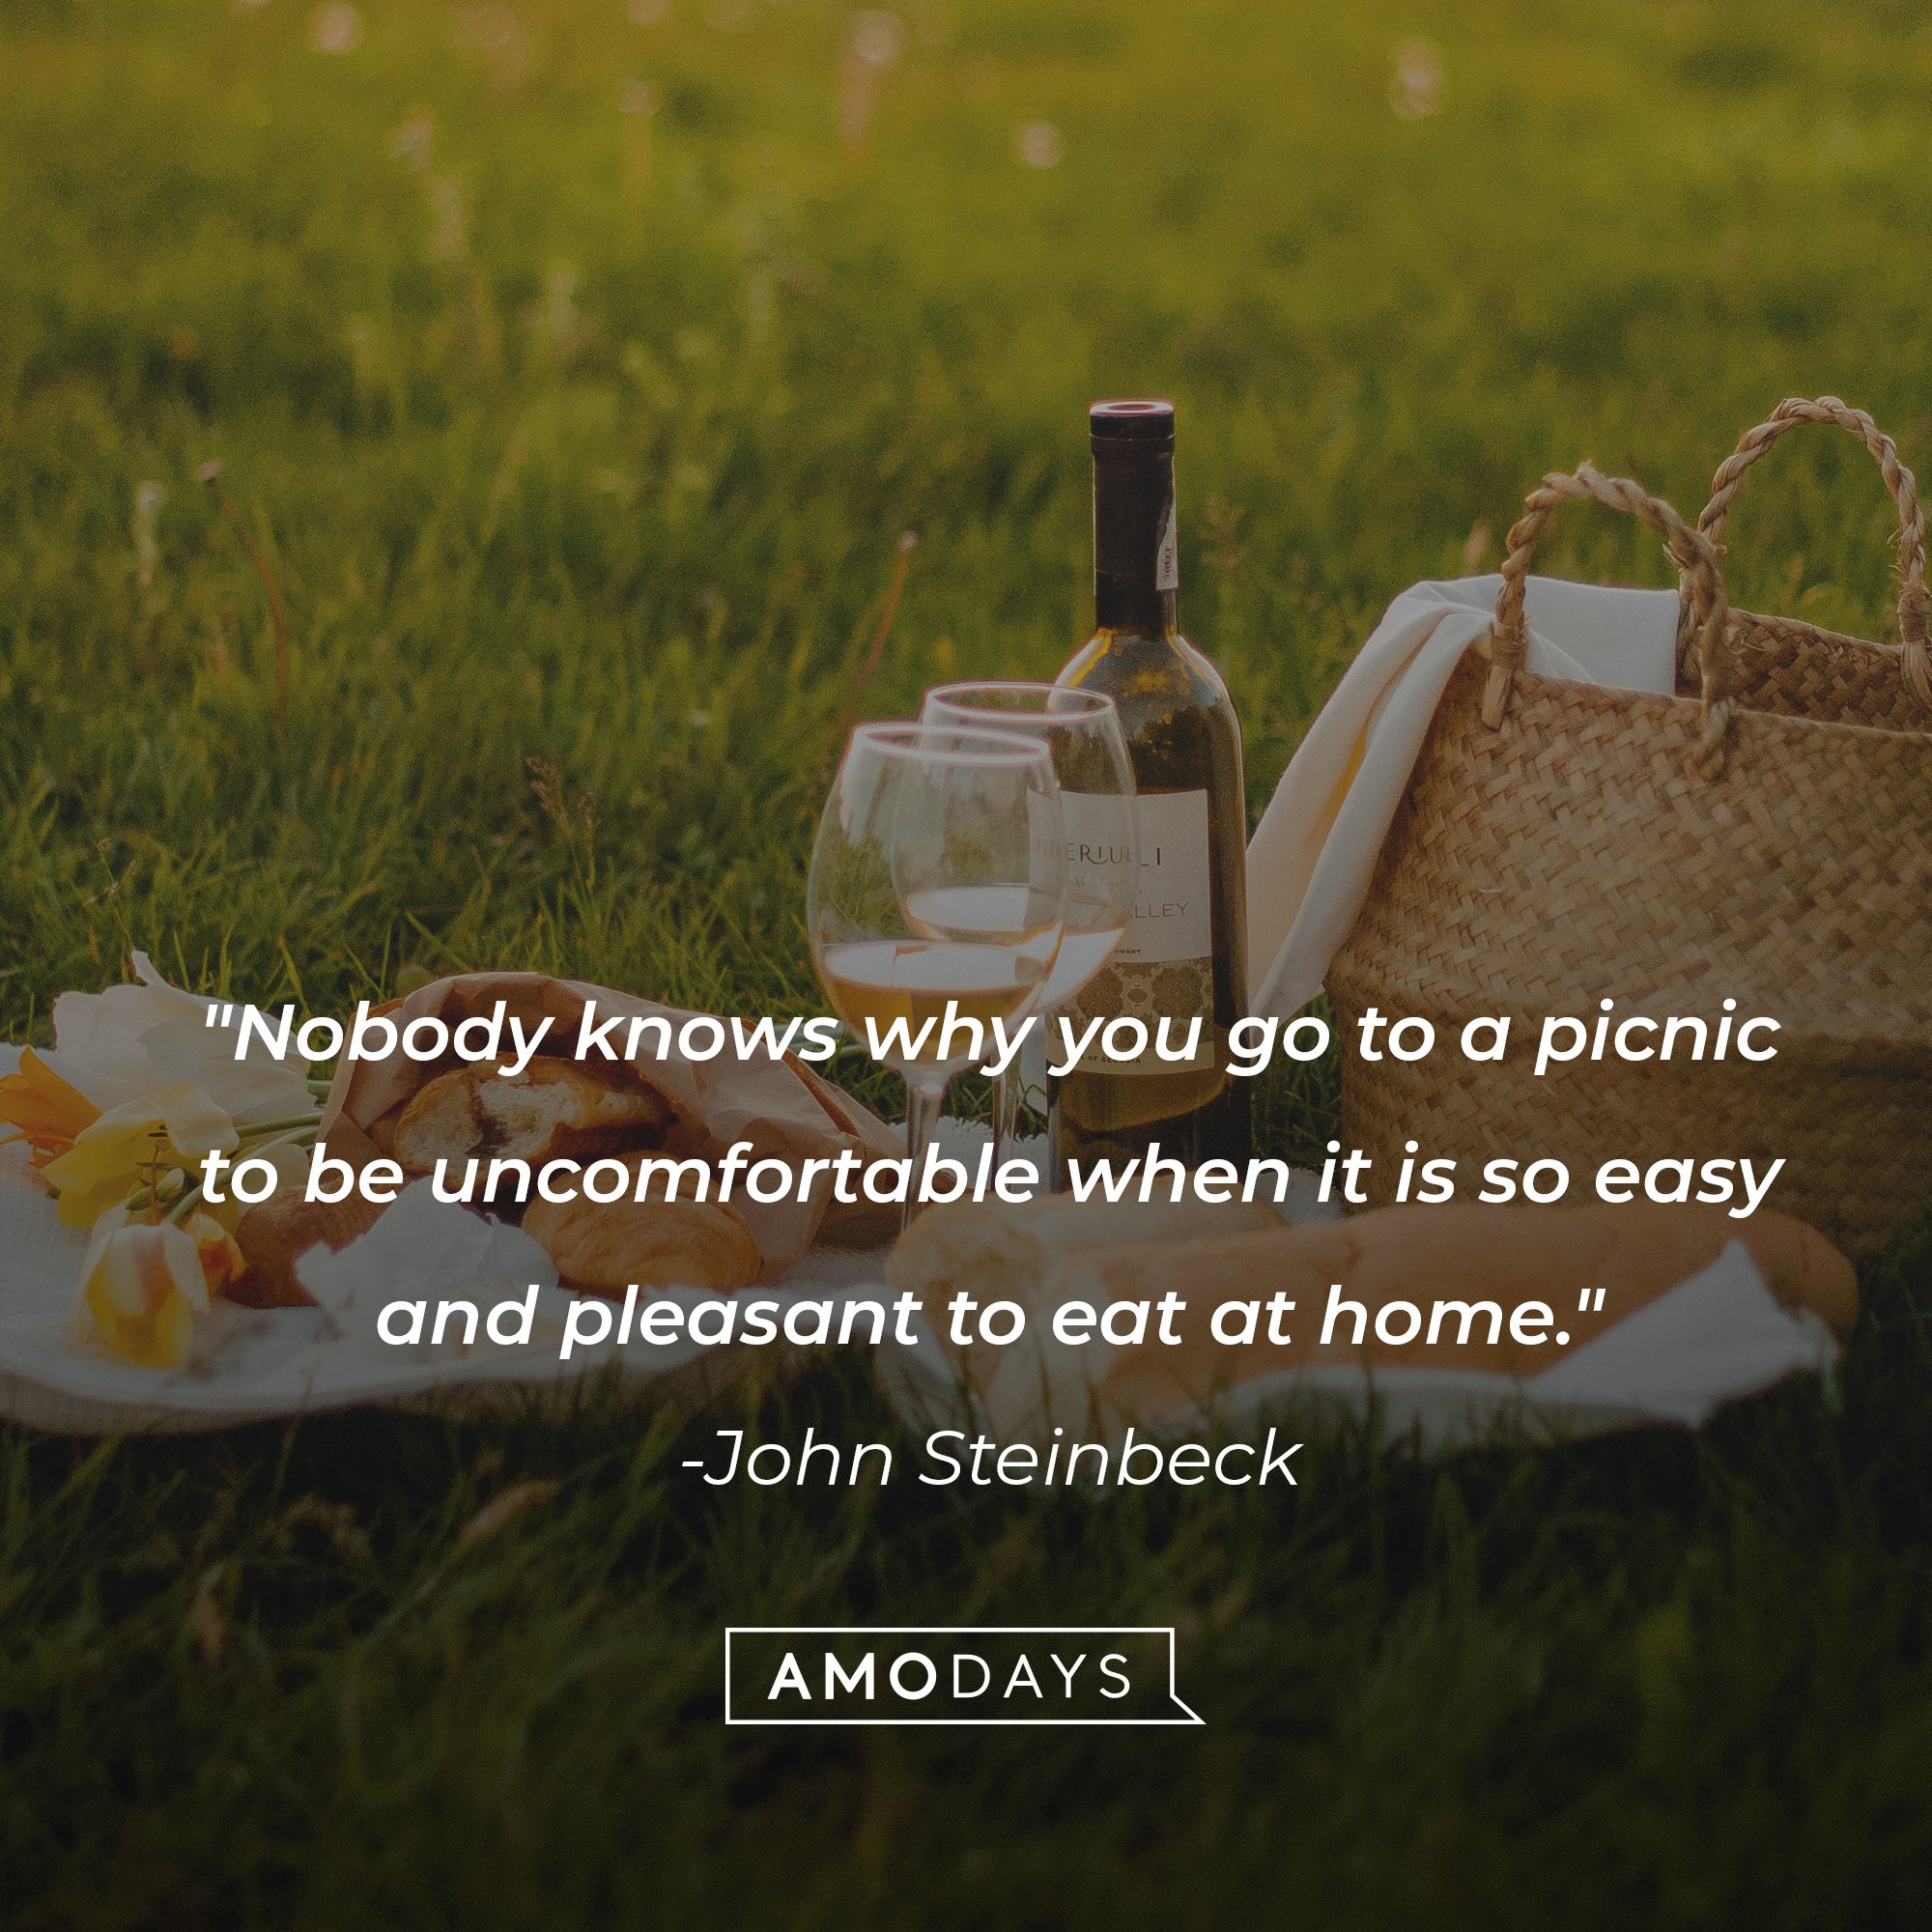 John Steinbeck's quote: "Nobody knows why you go to a picnic to be uncomfortable when it is so easy and pleasant to eat at home." | Image: AmoDays